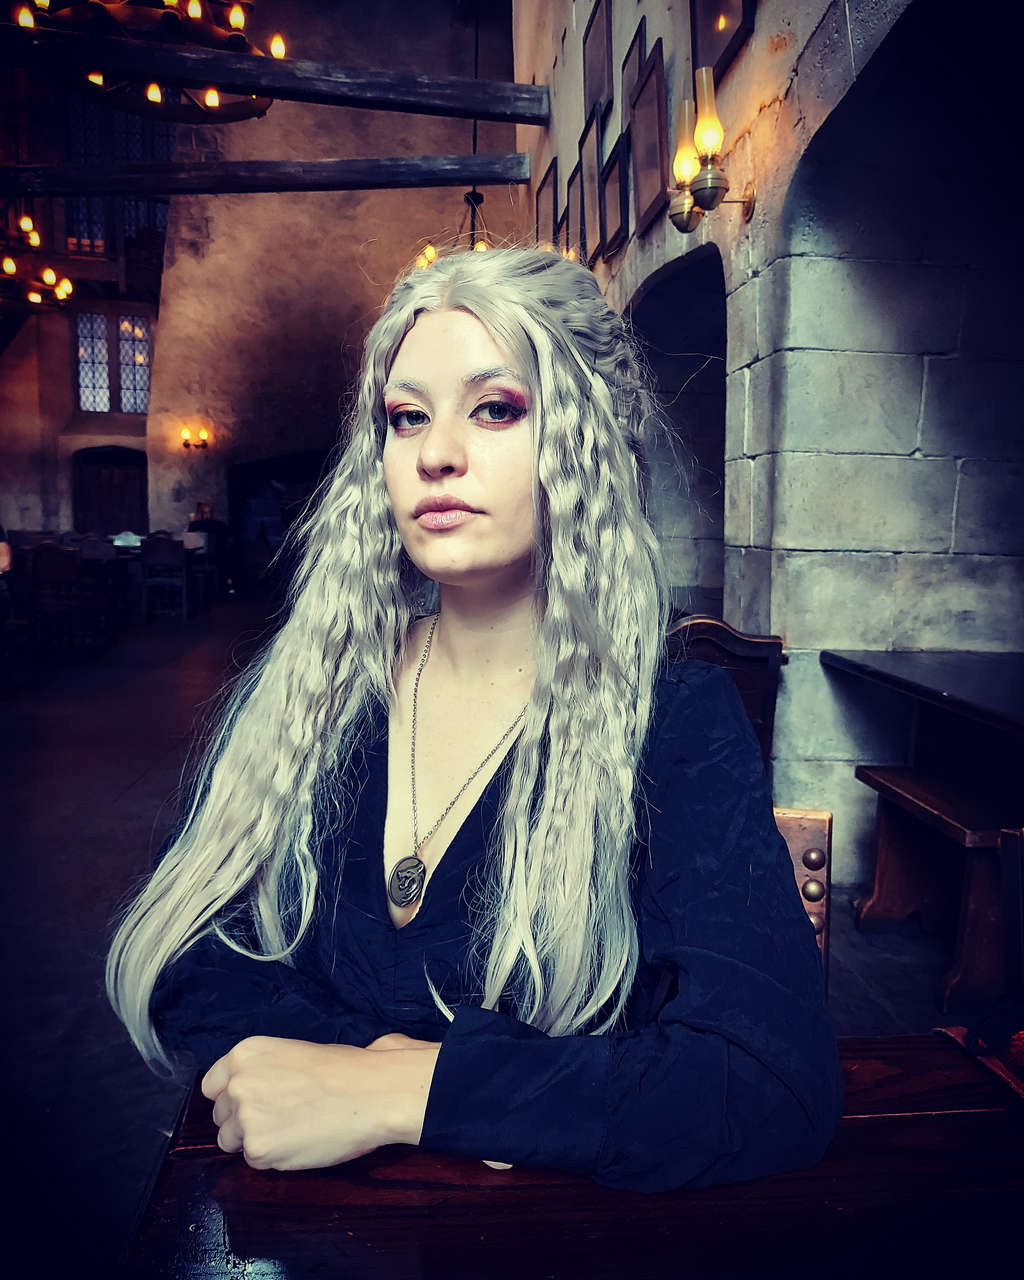 Felt Really Pretty For The First Time In A Long Time Geralt Chickypuffcosplay On Inst